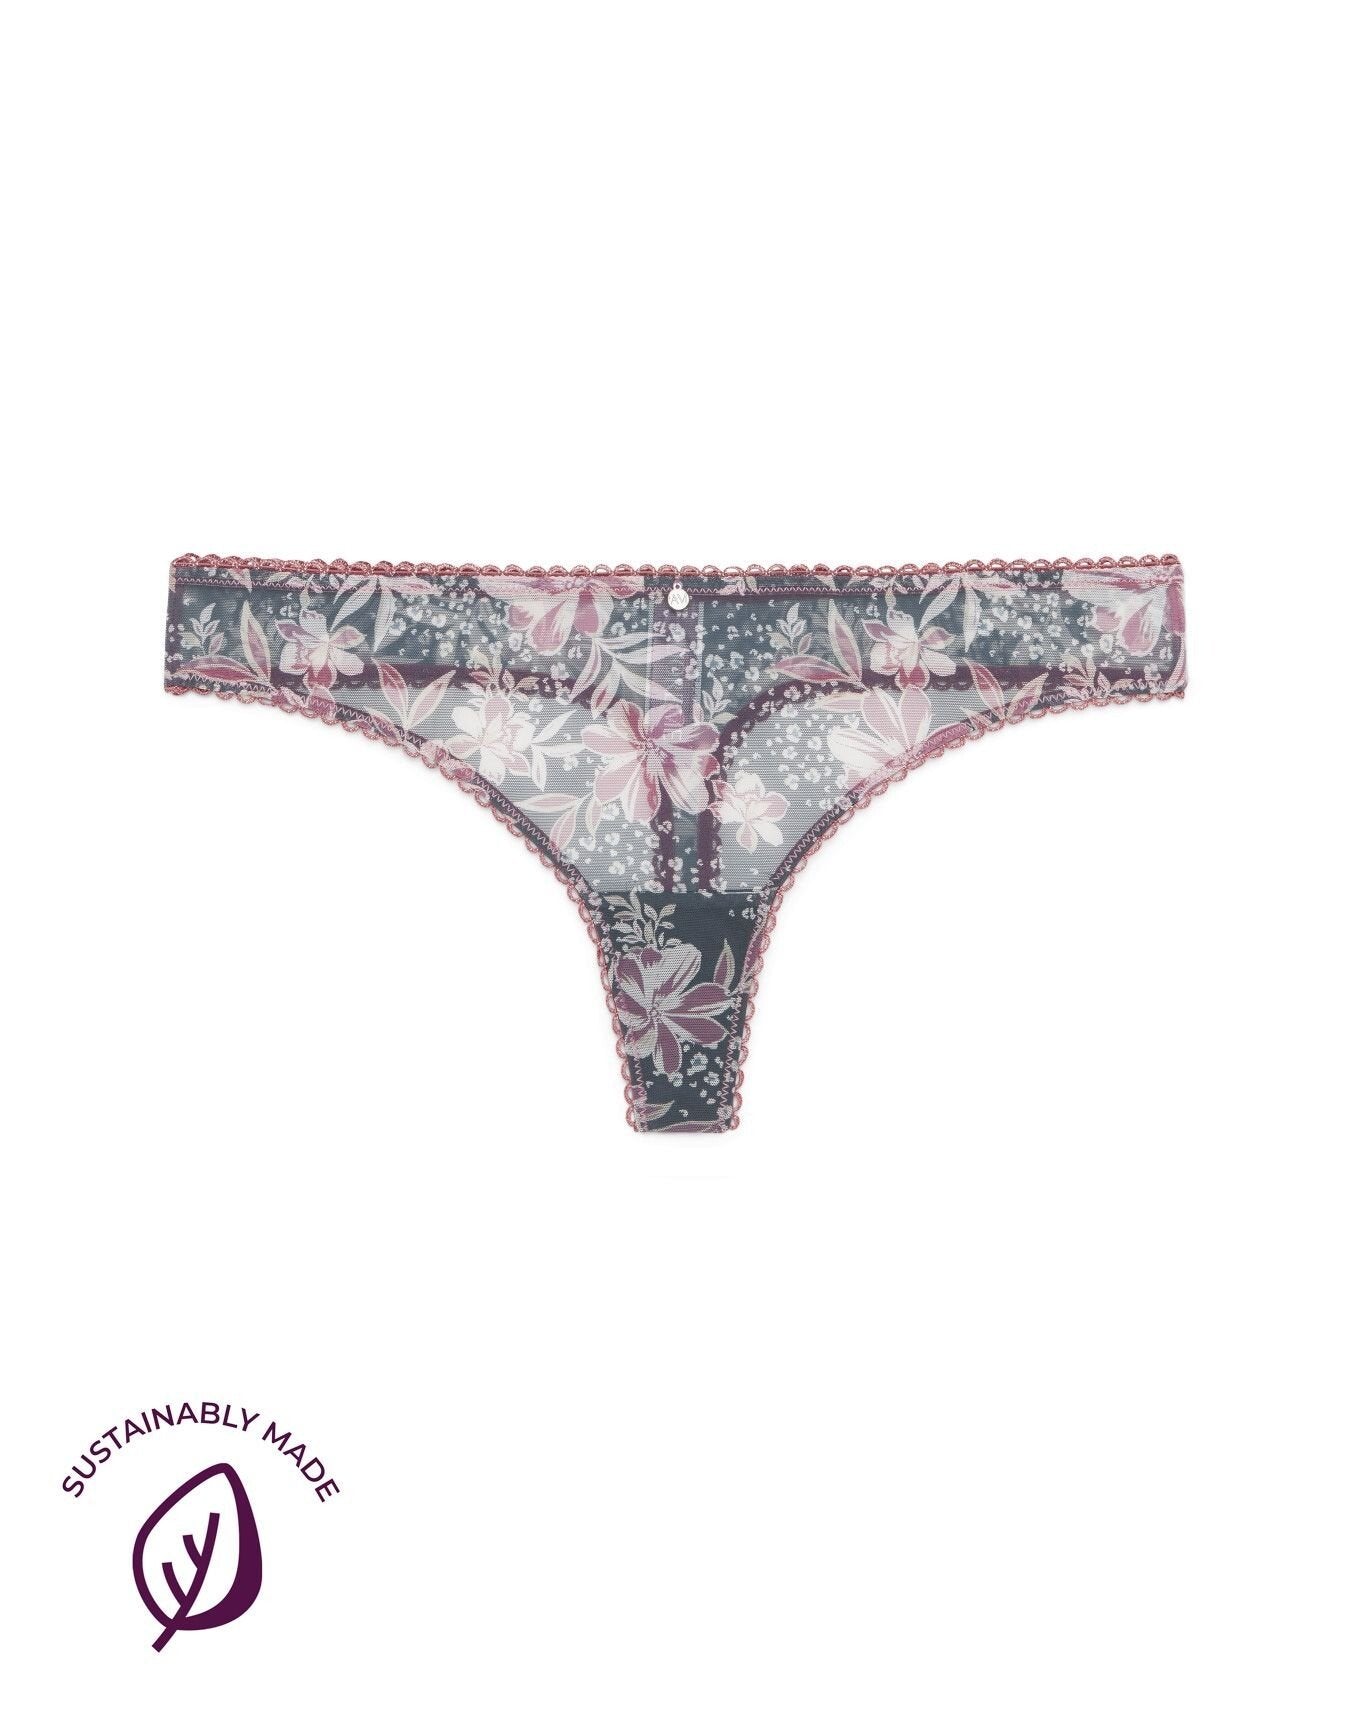 Adore Me Malina Thong in color Baskin' Flowers C01 and shape thong